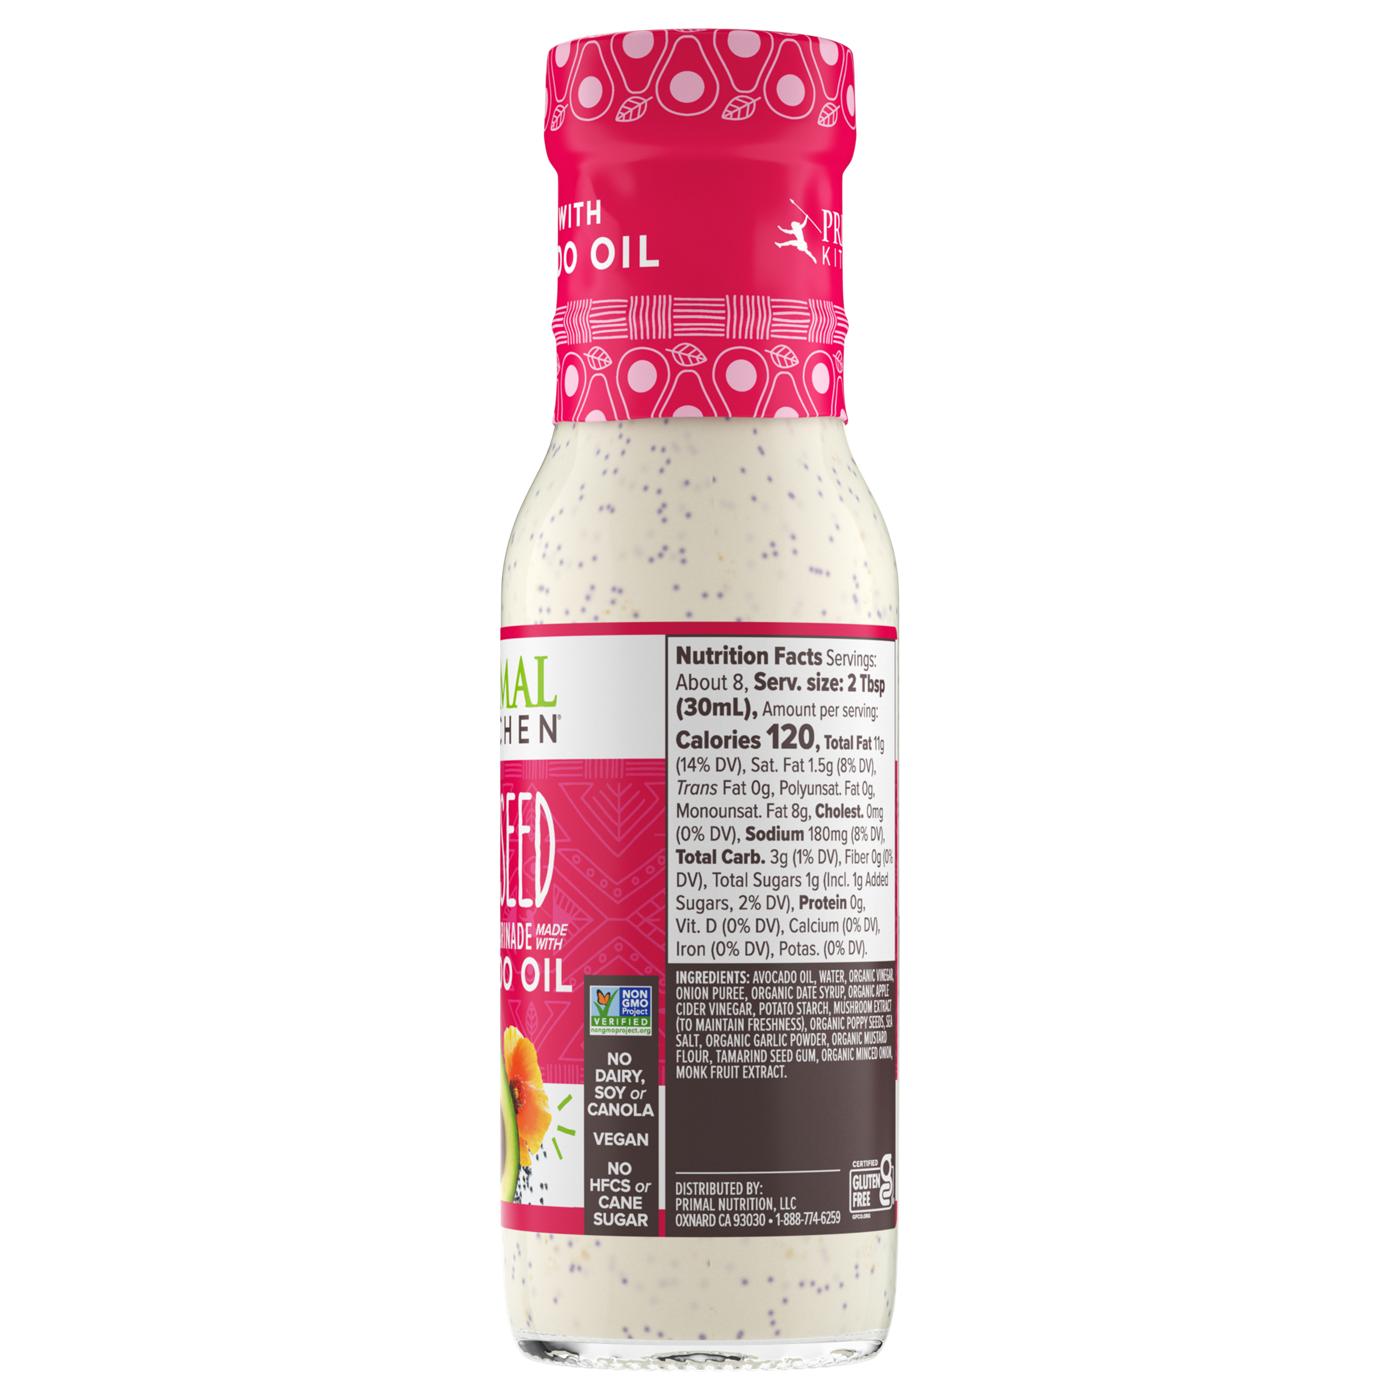 Primal Kitchen Poppy Seed Dressing with Avocado Oil; image 2 of 2